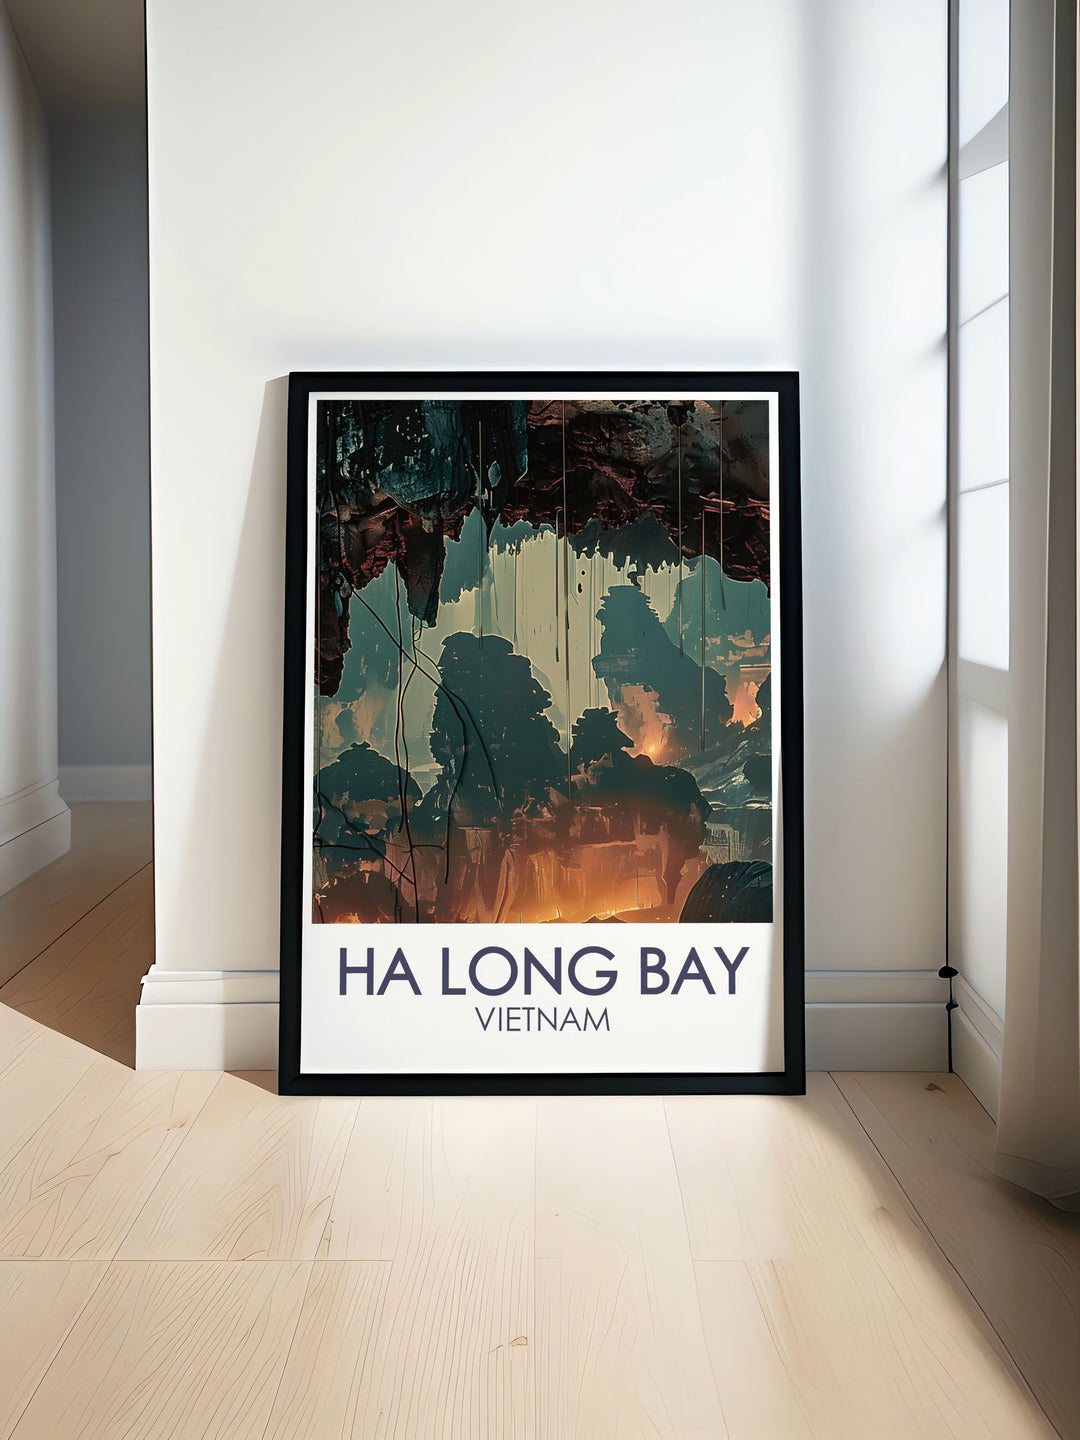 Highlighting the natural beauty and cultural heritage of Ha Long Bay, this travel poster offers a captivating view of Vietnams Surprising Cave, ideal for those who appreciate scenic art.